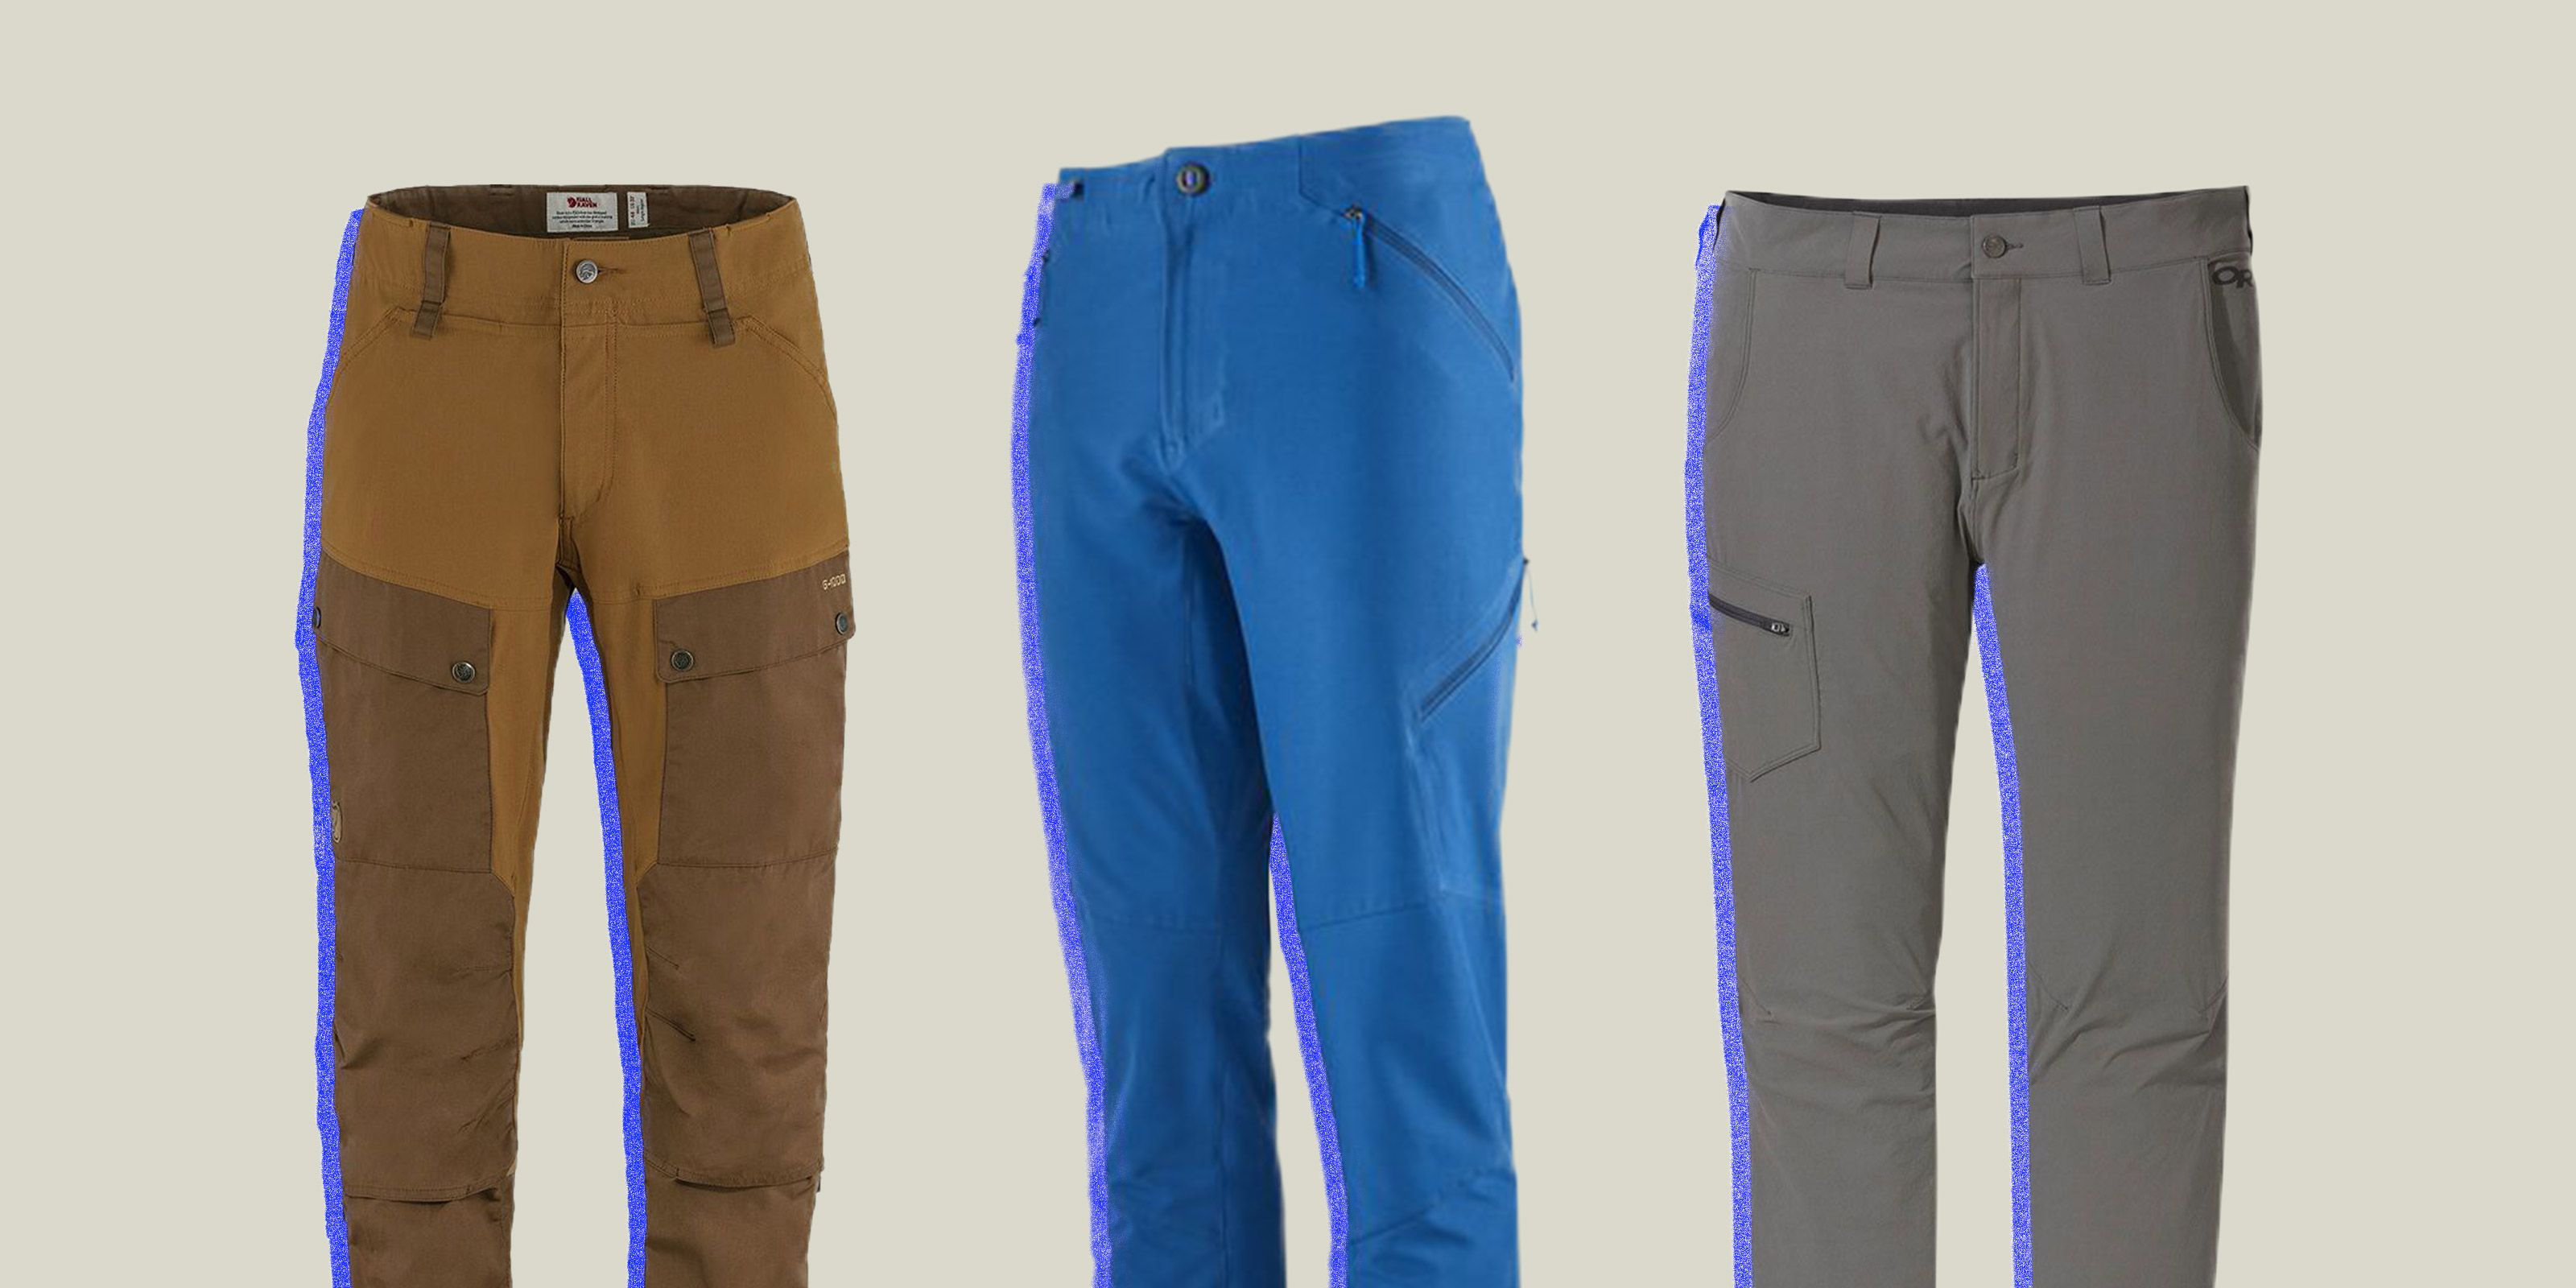 refresh best pants for winter hiking lead 1645029761